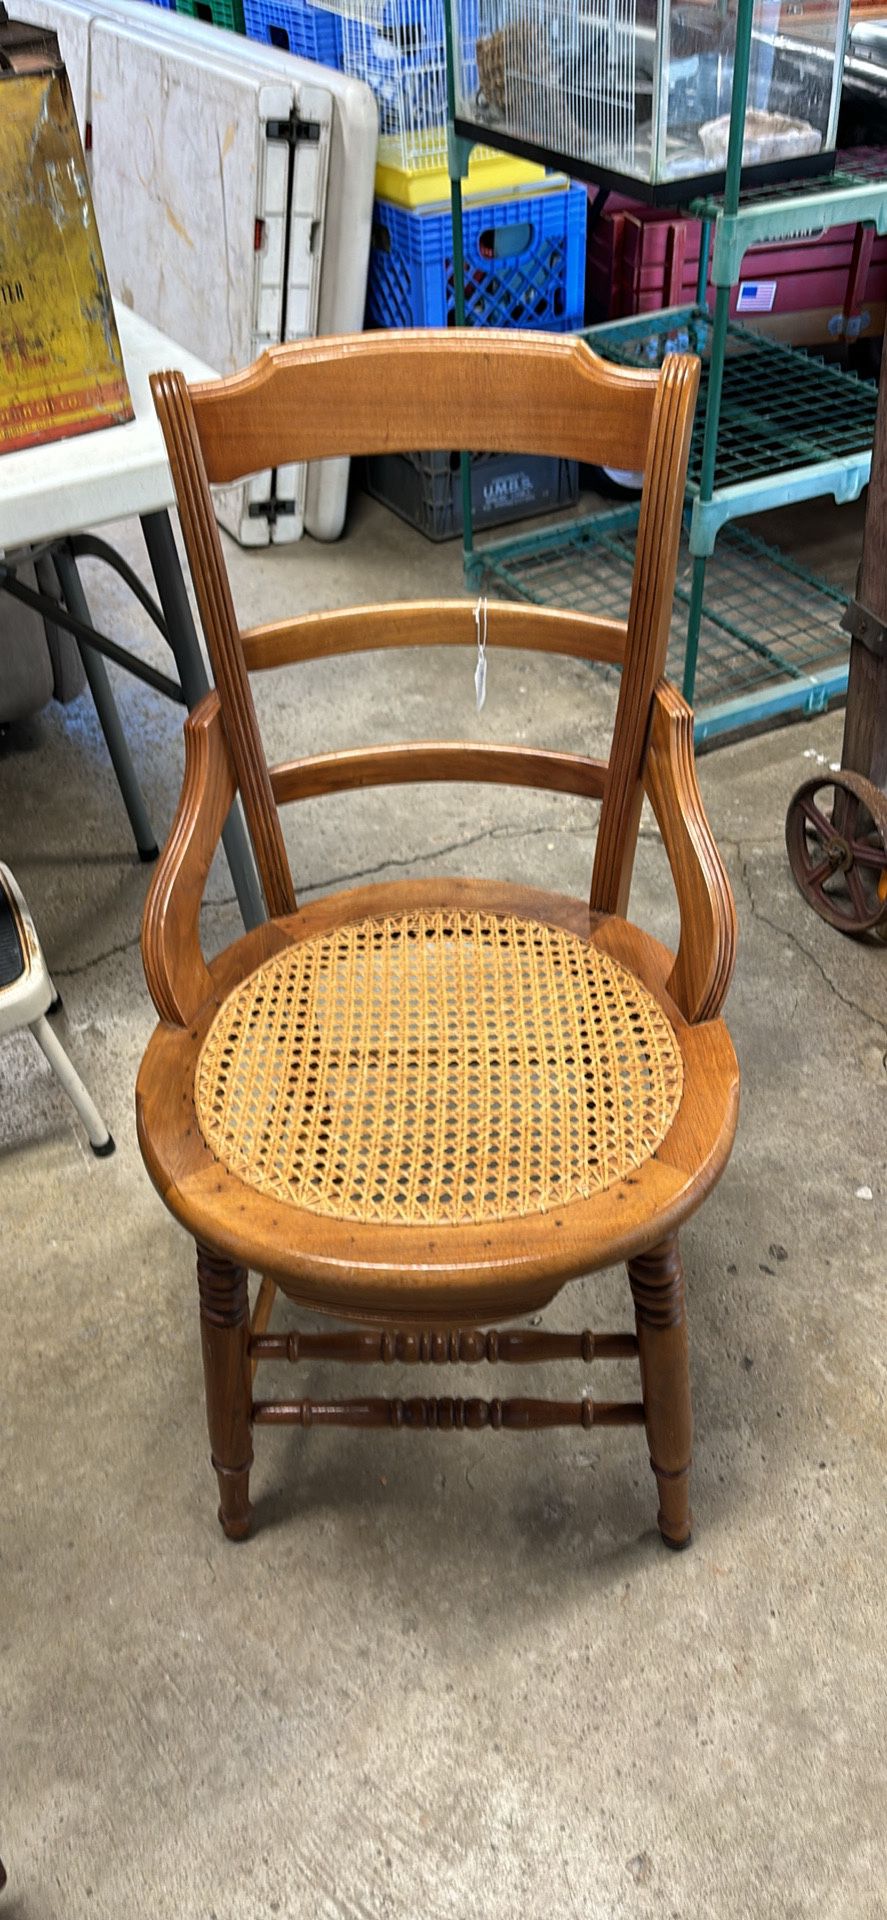 Vintage Wooden Chair 